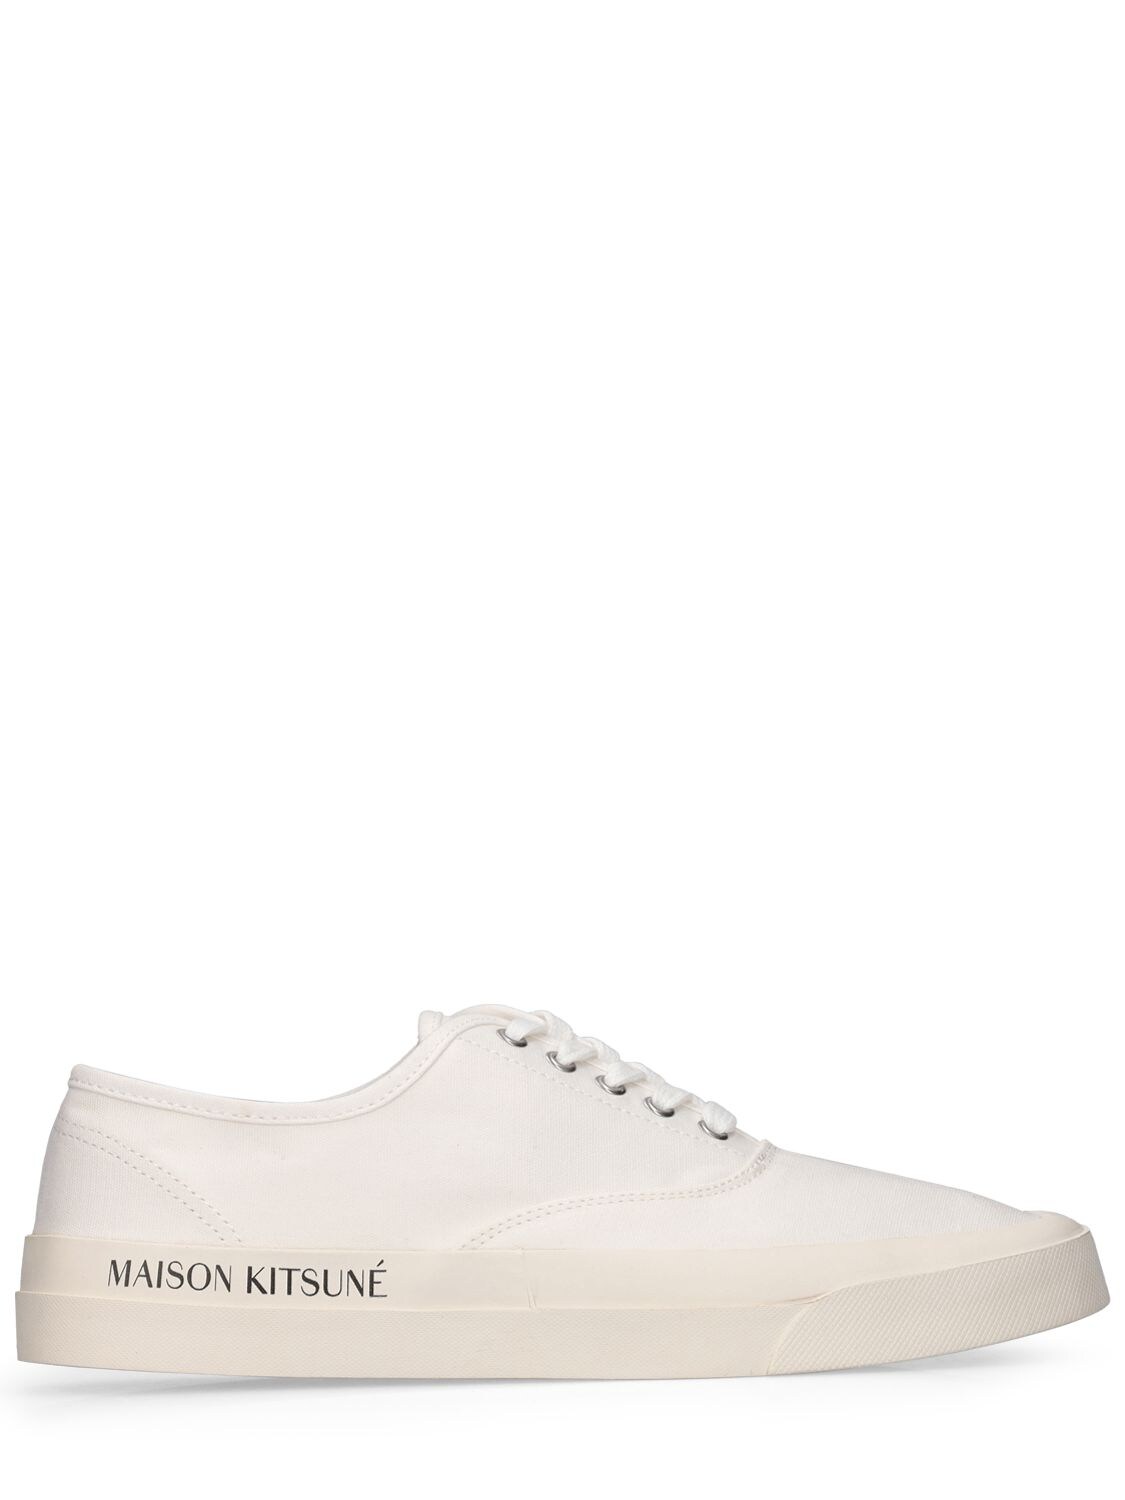 Maison Kitsuné Mk Printed Sole Canvas Low Top Sneakers In White